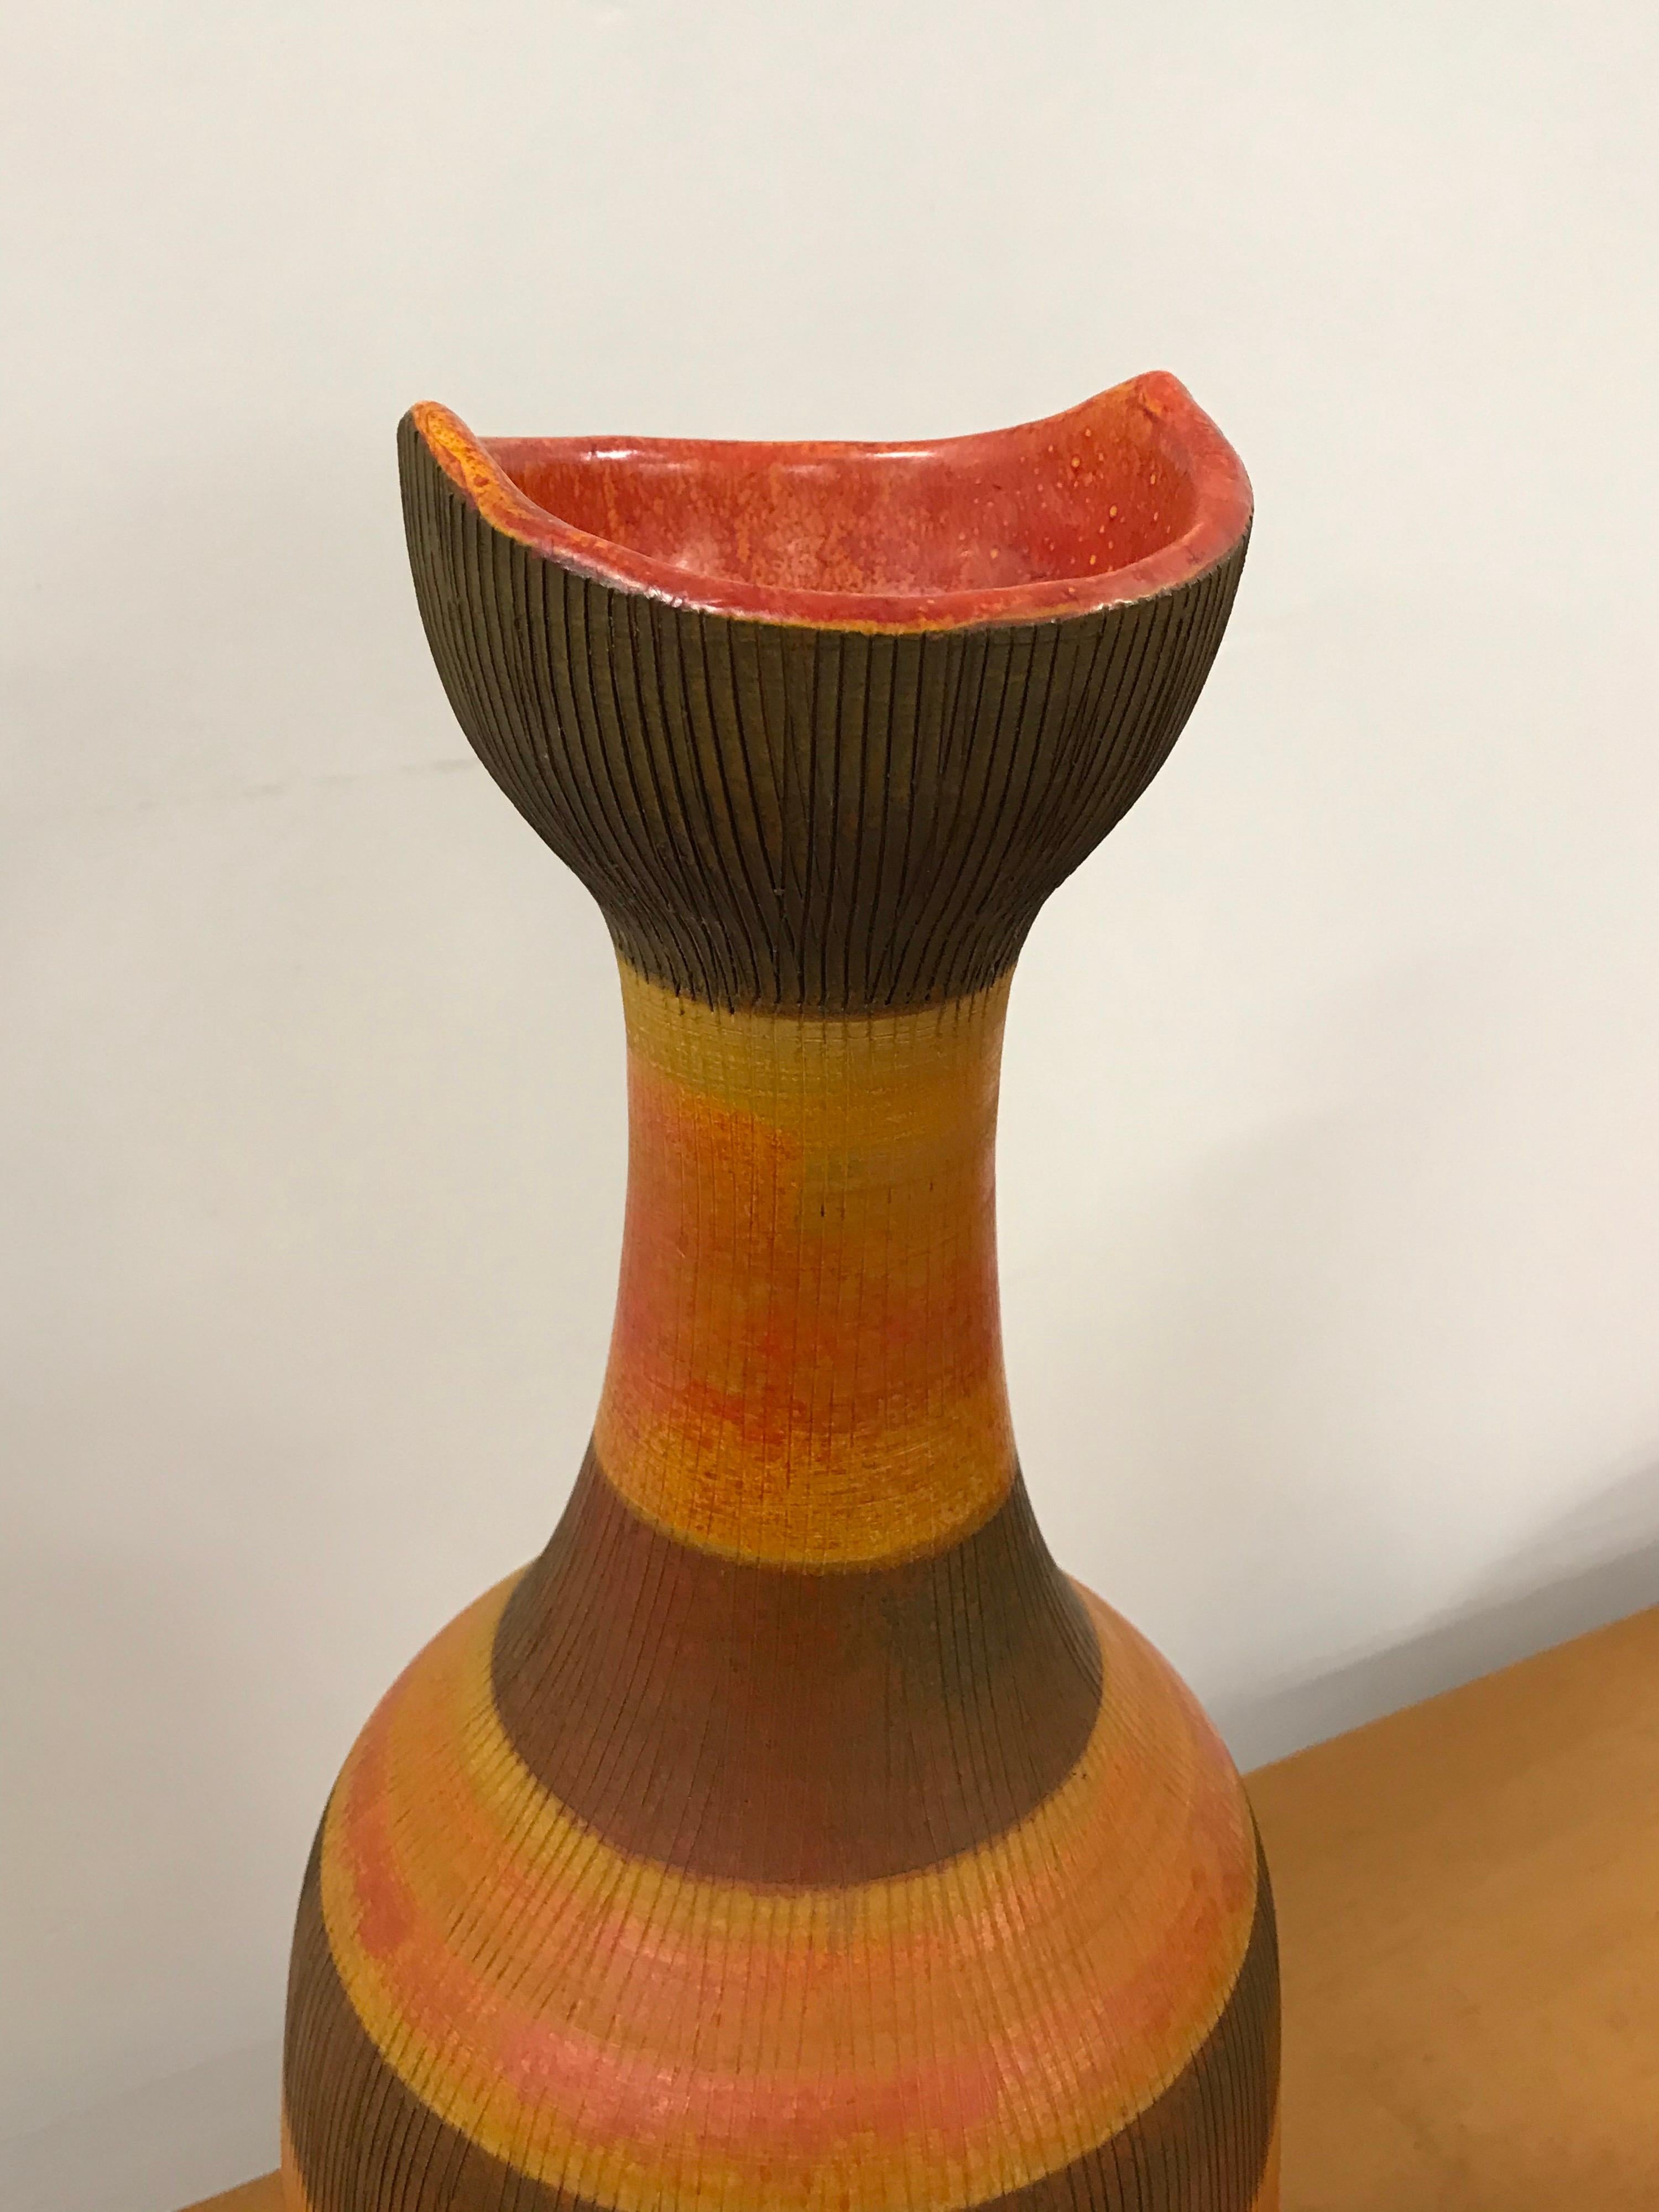 Exceptional and large floor vase designed by Aldo Londi for Bitossi. Rare and largest size of this shape. Stunning color and form. 
Measures: 20” tall 
7.5” wide.